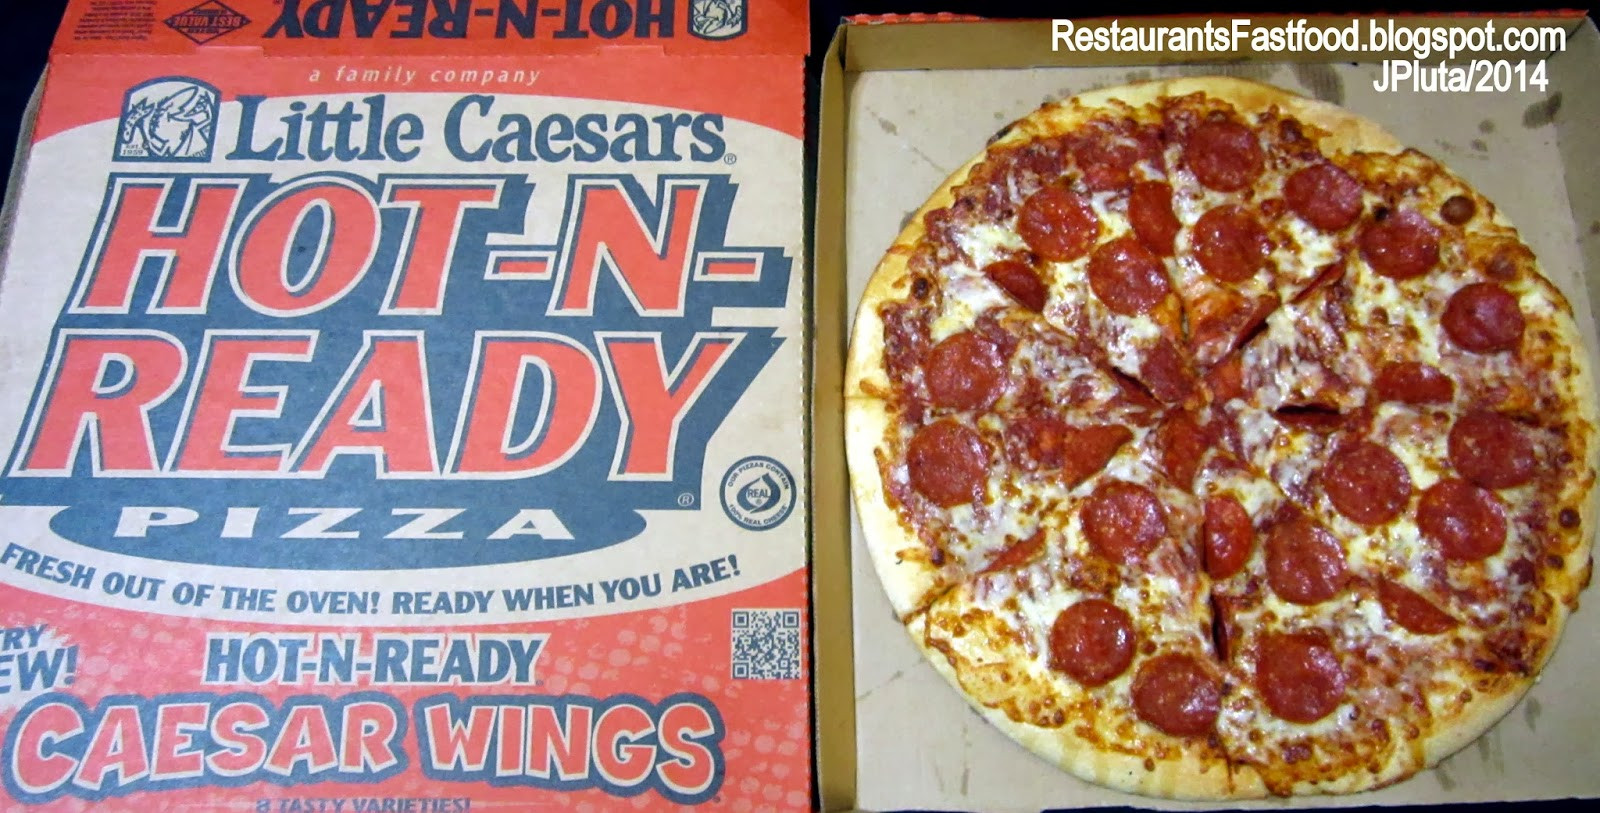 Little Caesars Hot-N-Ready Pepperoni Pizza
 PHENIX CITY ALABAMA Russell Cty Restaurant Bank Dr